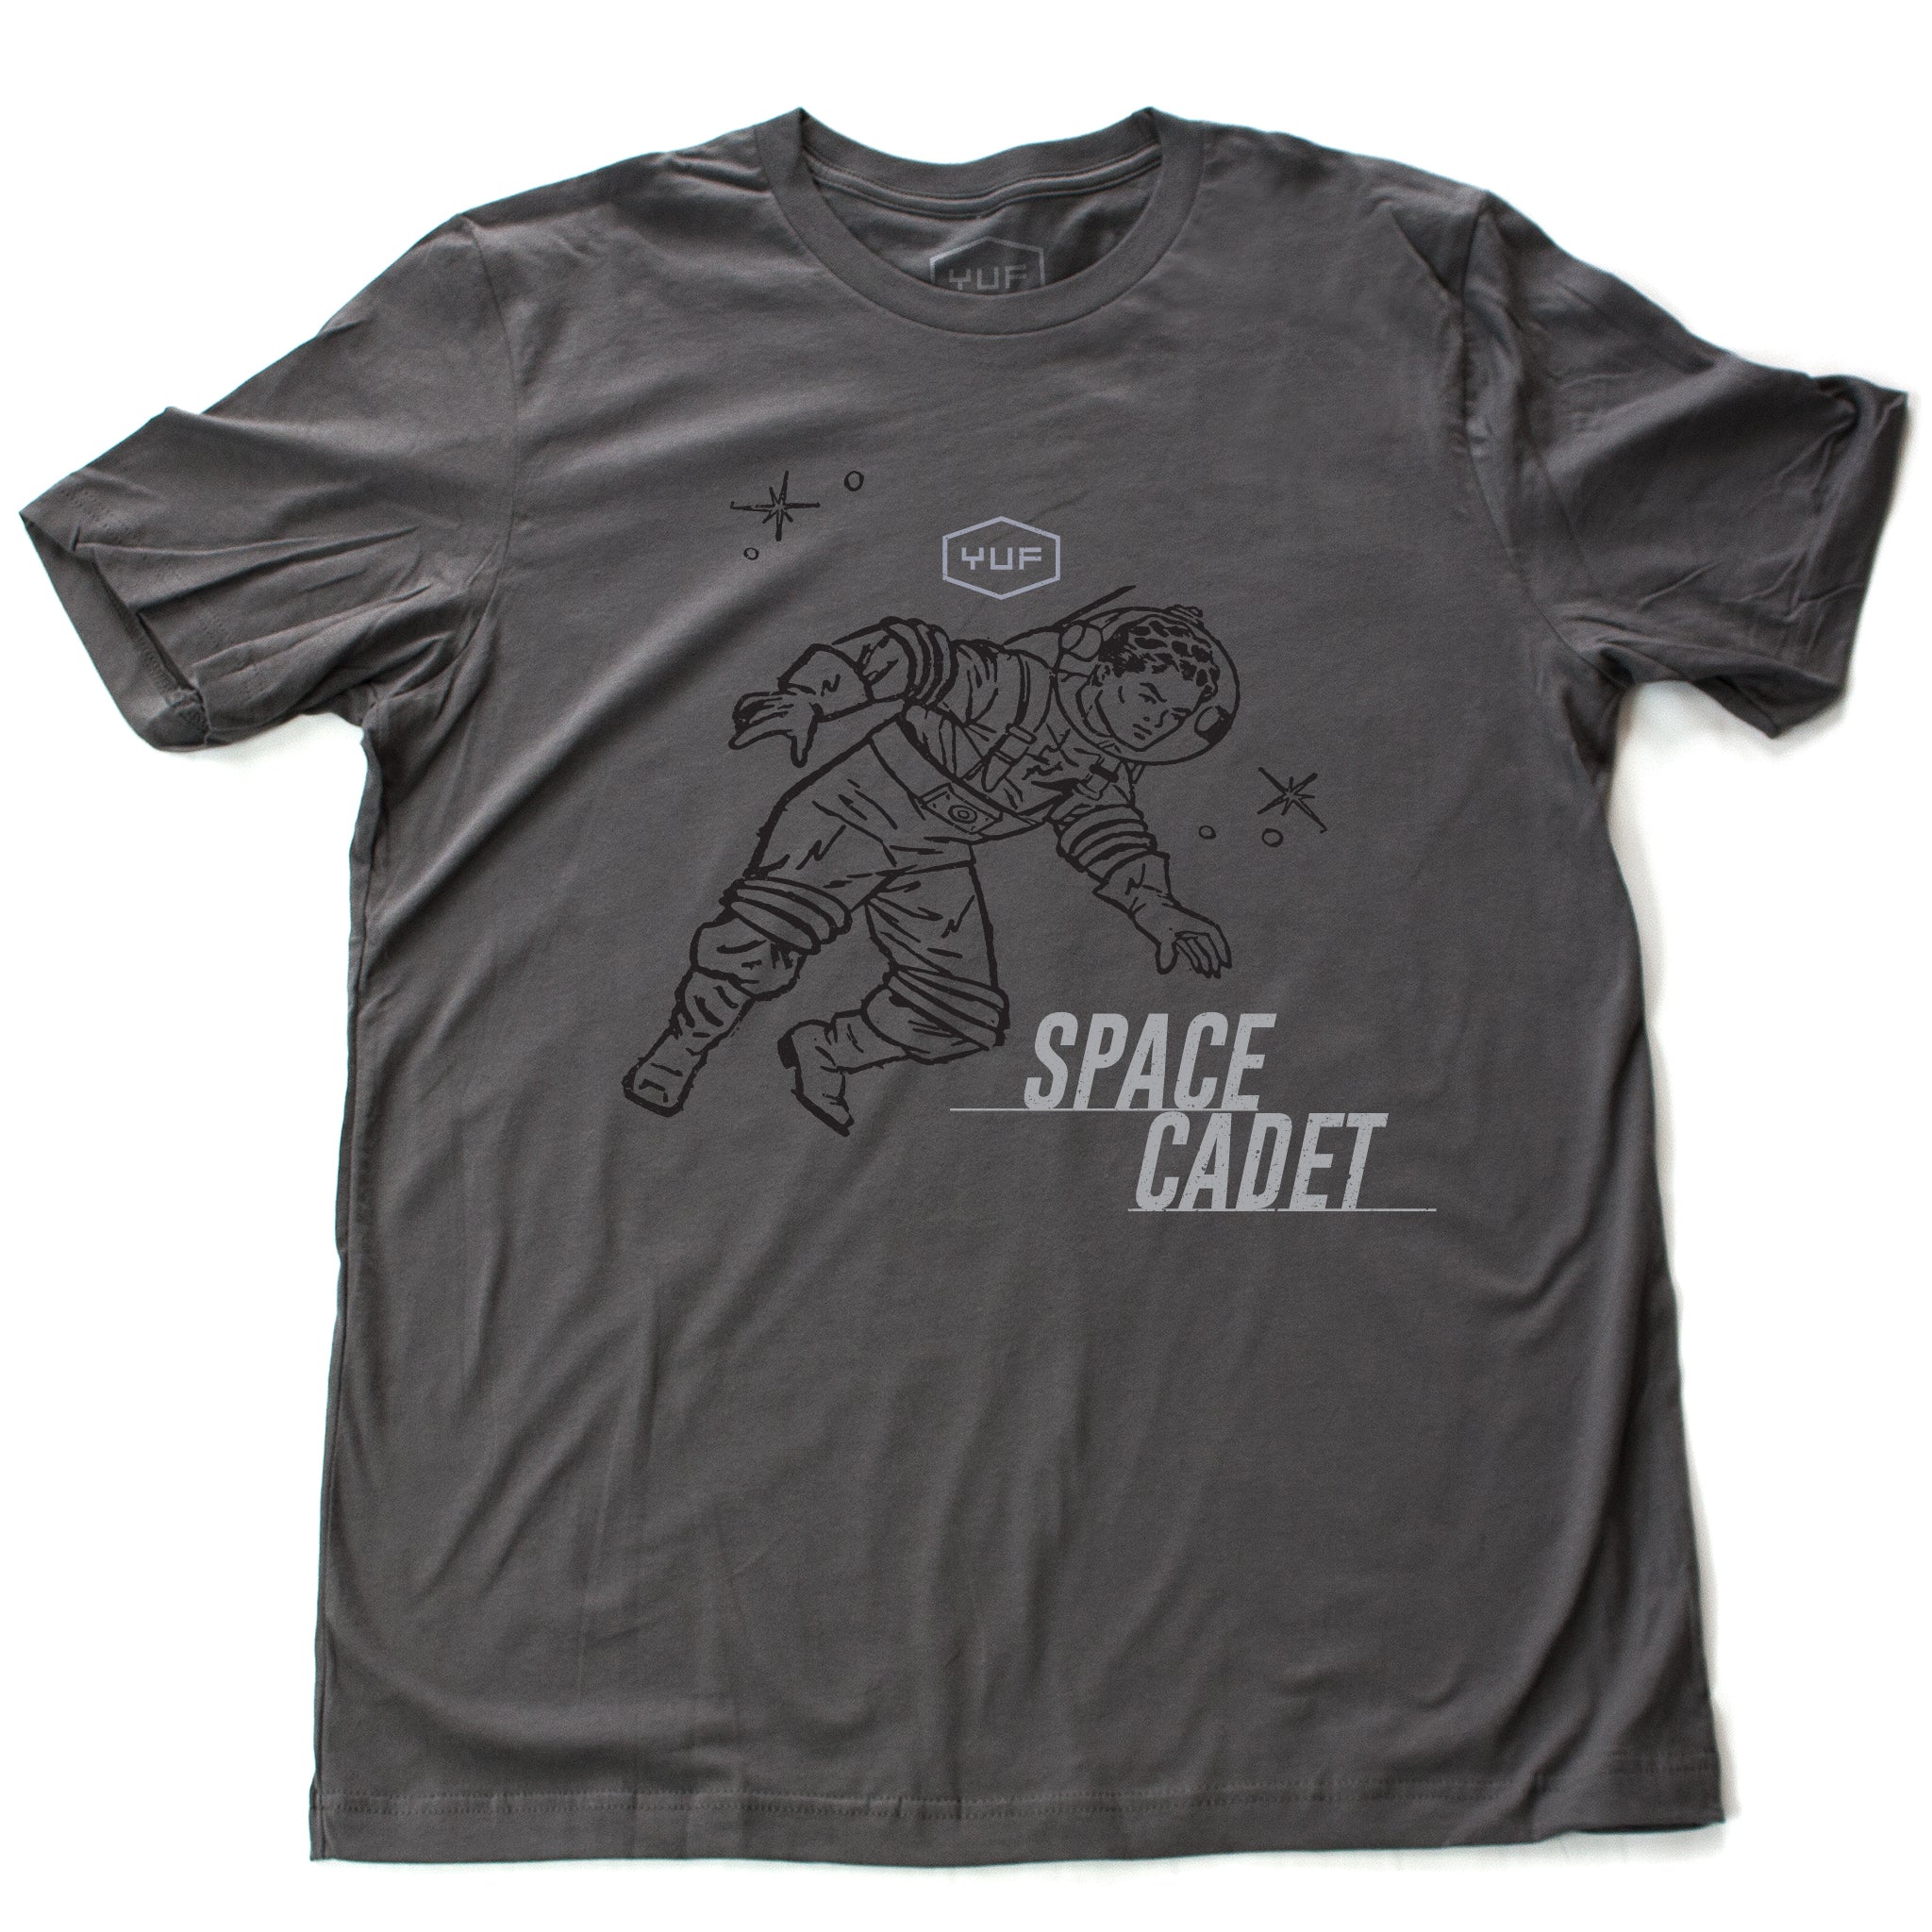 A sarcastic, self-deprecating vintage-inspired, retro design fashion t-shirt in Asphalt Gray, featuring an astronaut or spaceman, amid stars, and the word “SPACE CADET.” By fashion brand YUF, for wolfsaint.net 